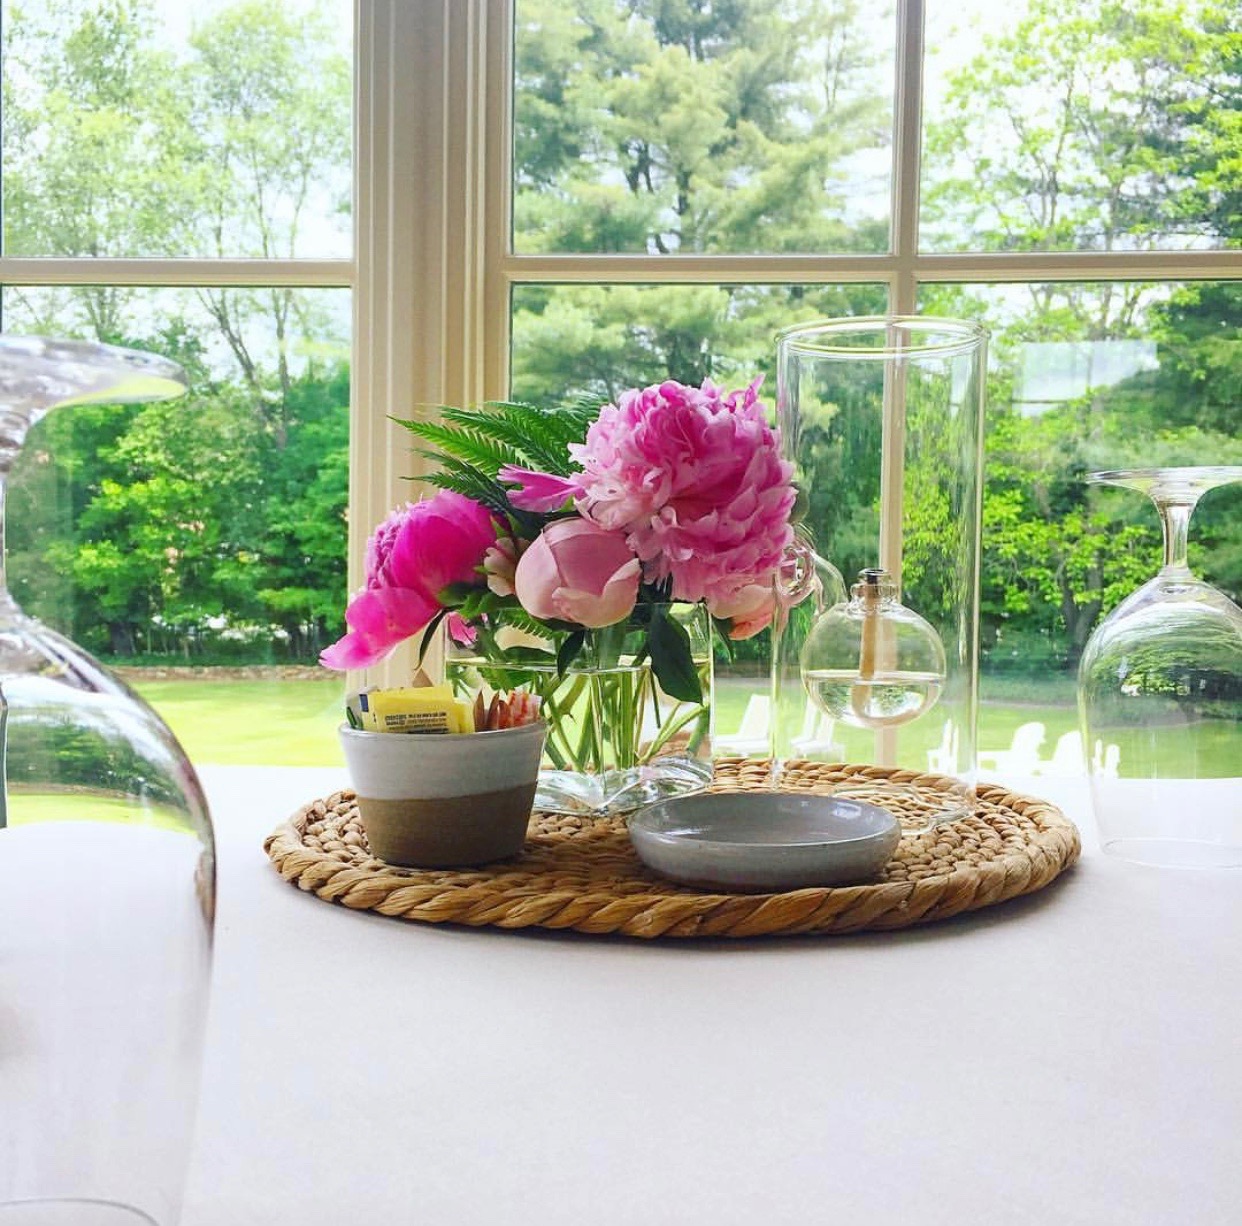 Dining room table with peonies.jpg